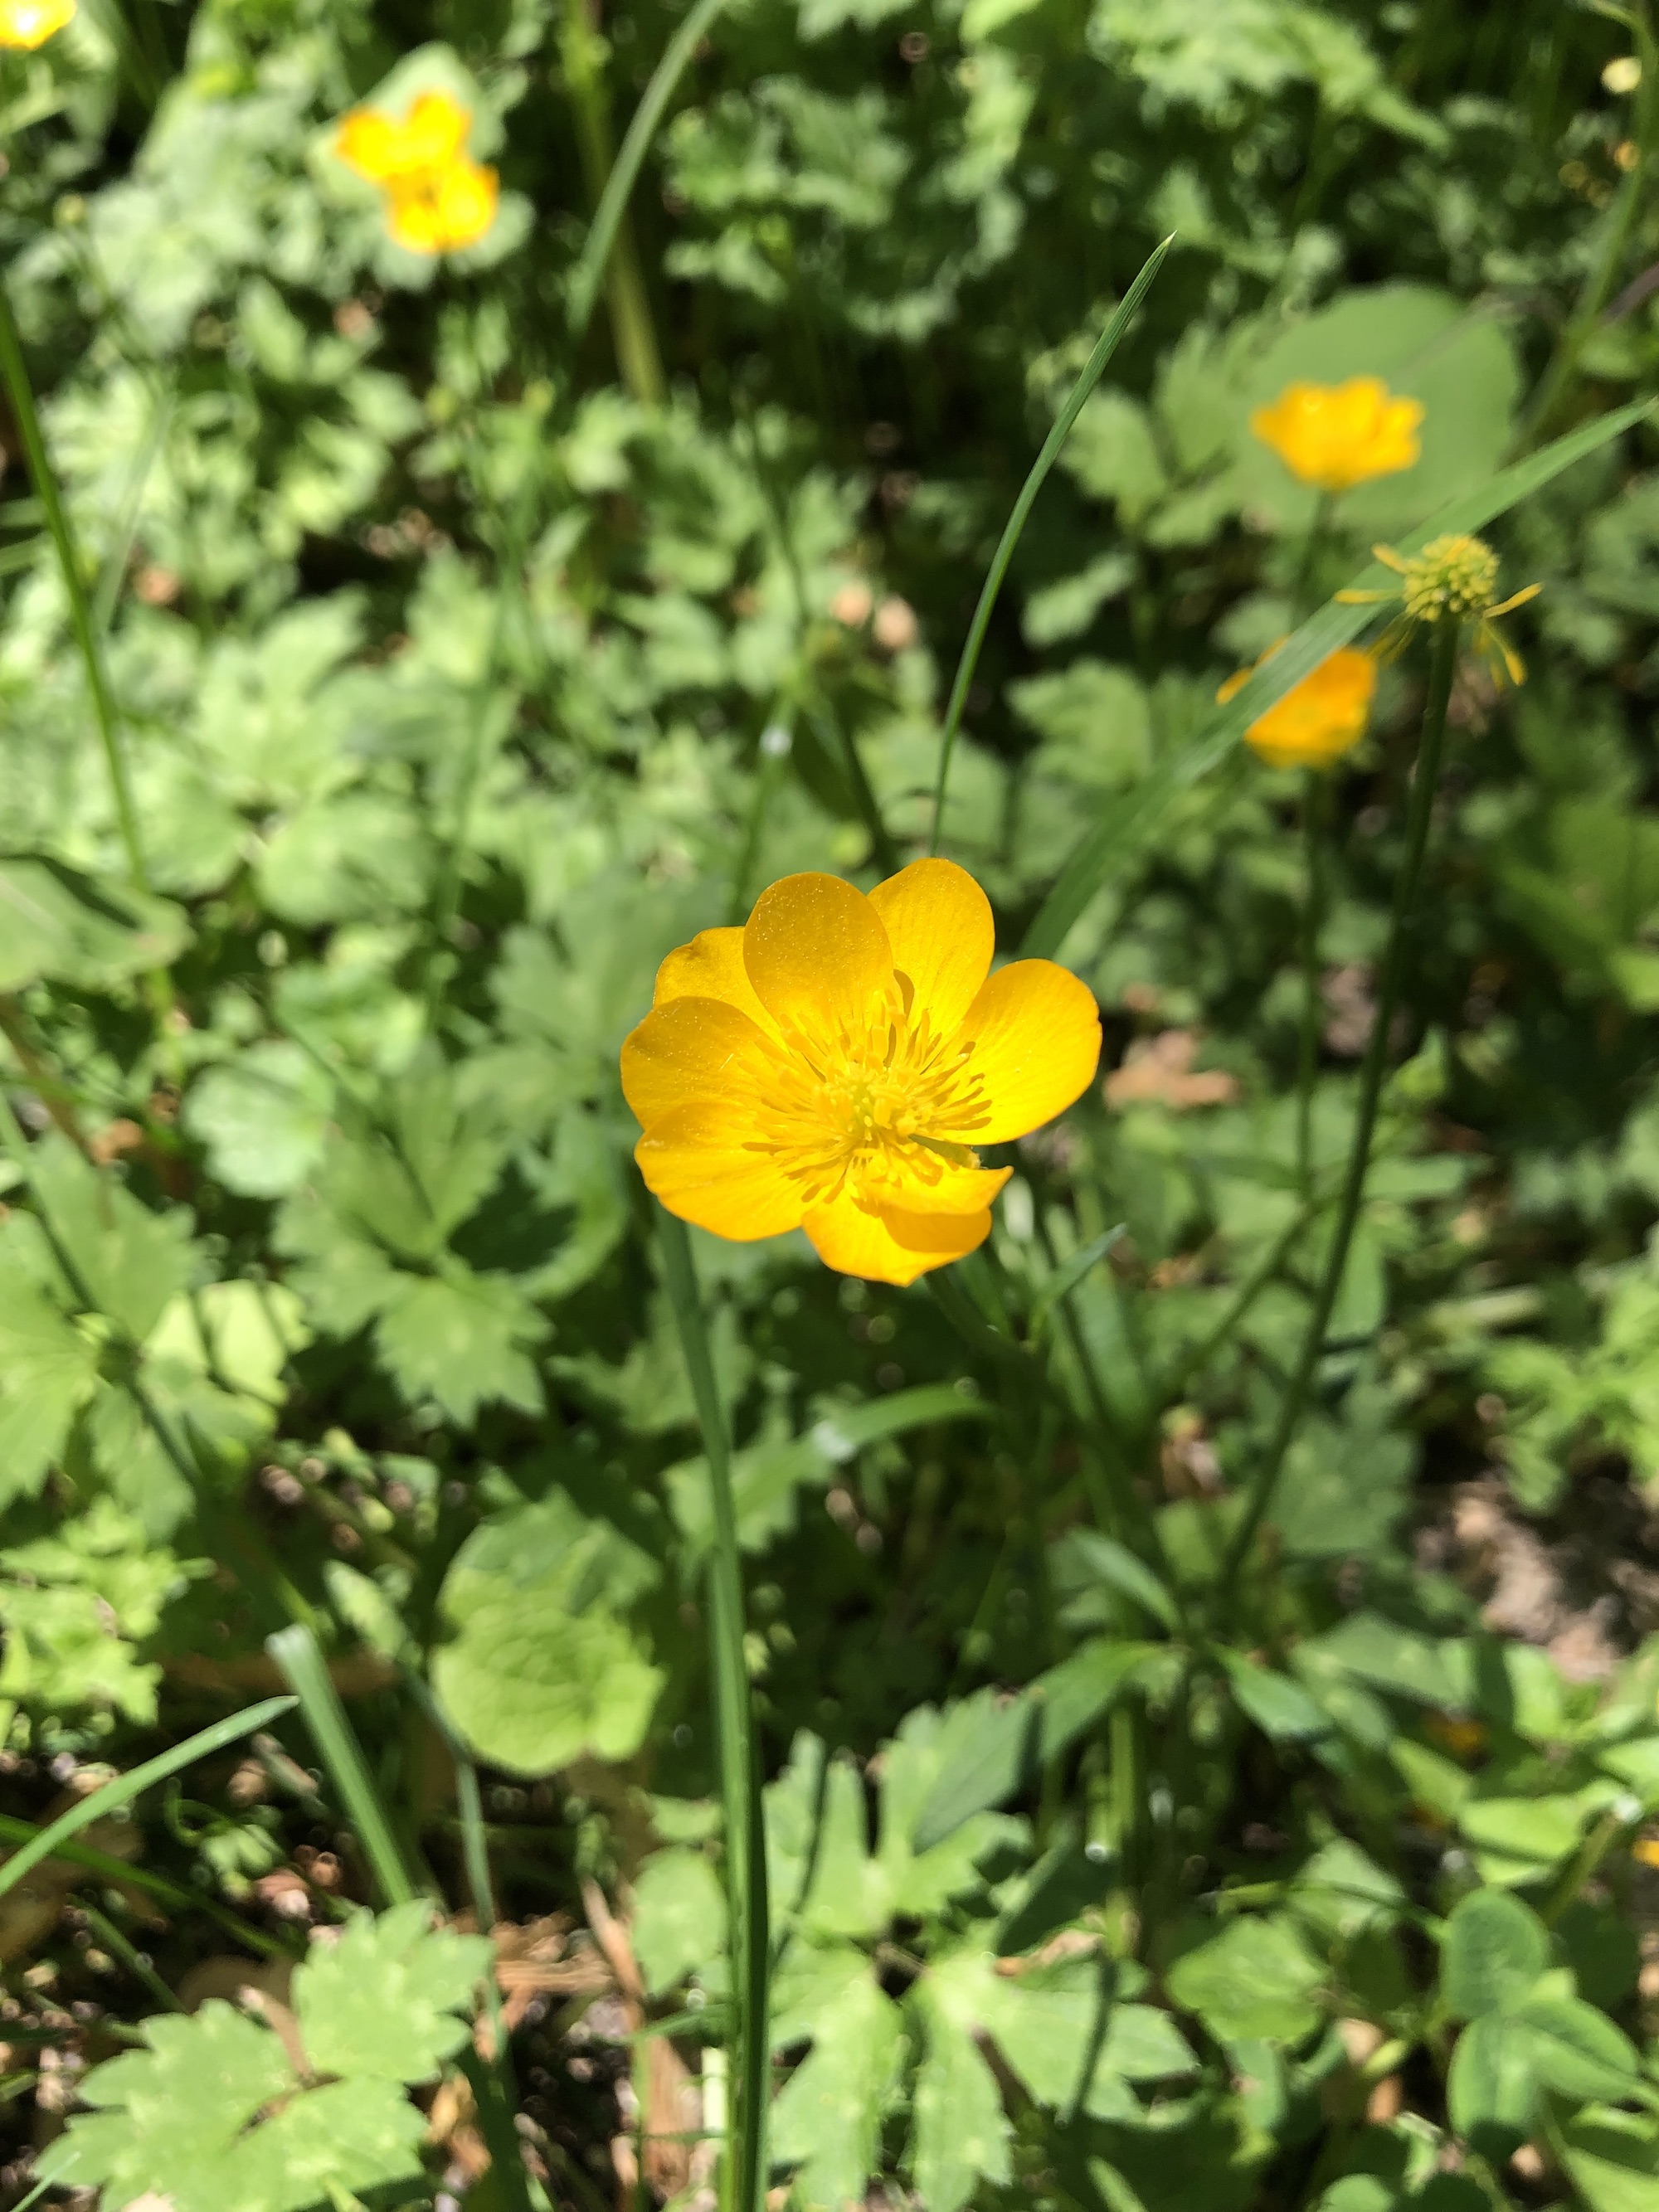 Creeping Buttercup along the bike path behind Gregory Street between Commonwealth and Glenway in Madison, Wisconsin on June 3, 2022.